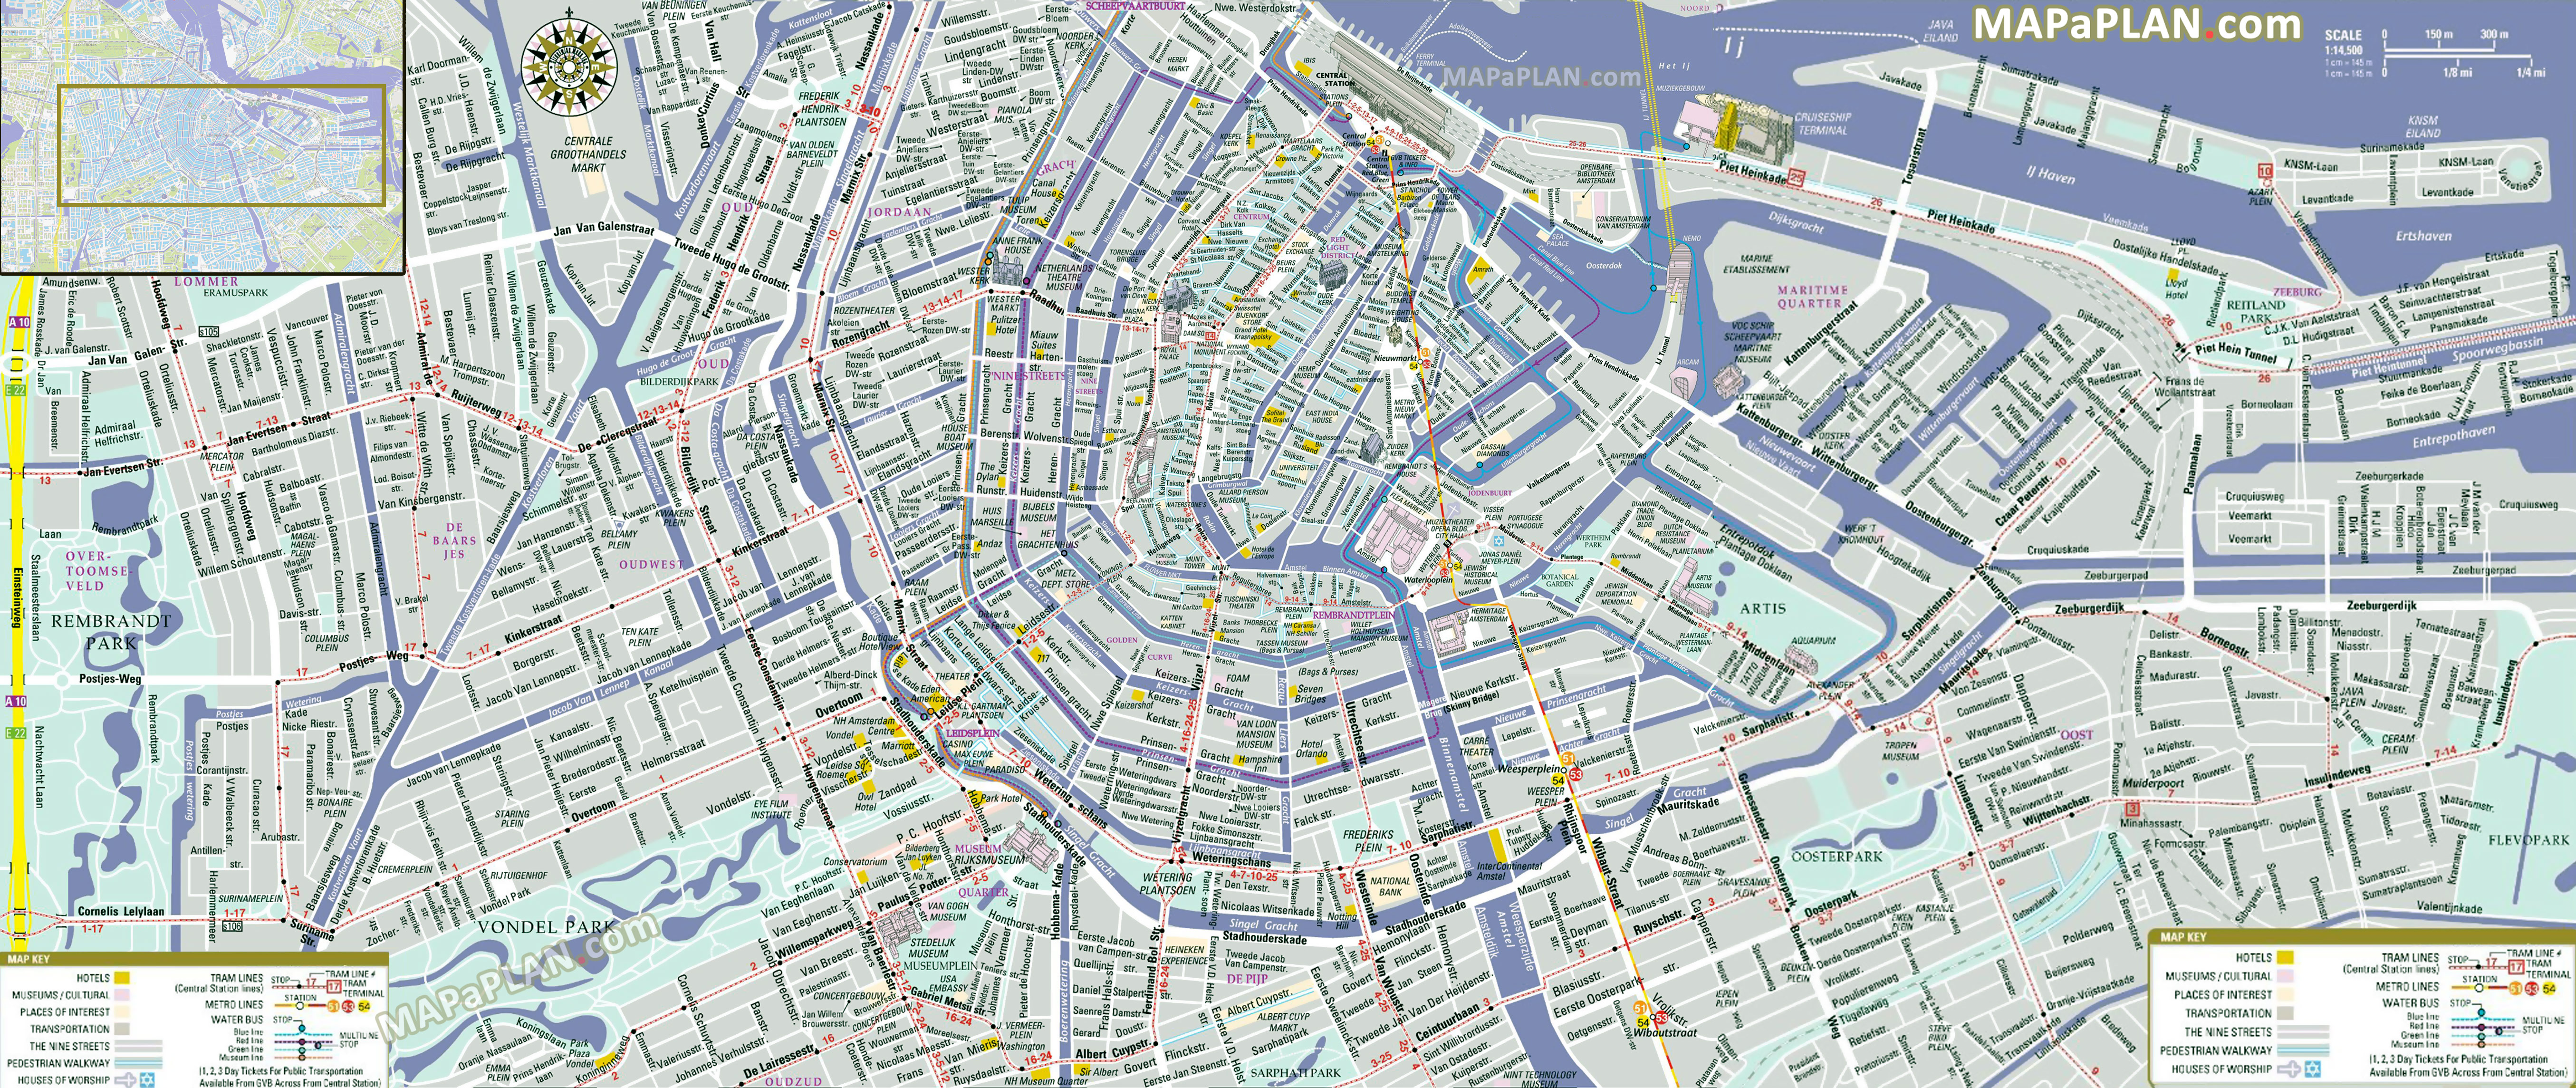 City centre detailed street travel plan must see places to visit tram metro lines Amsterdam top tourist attractions map